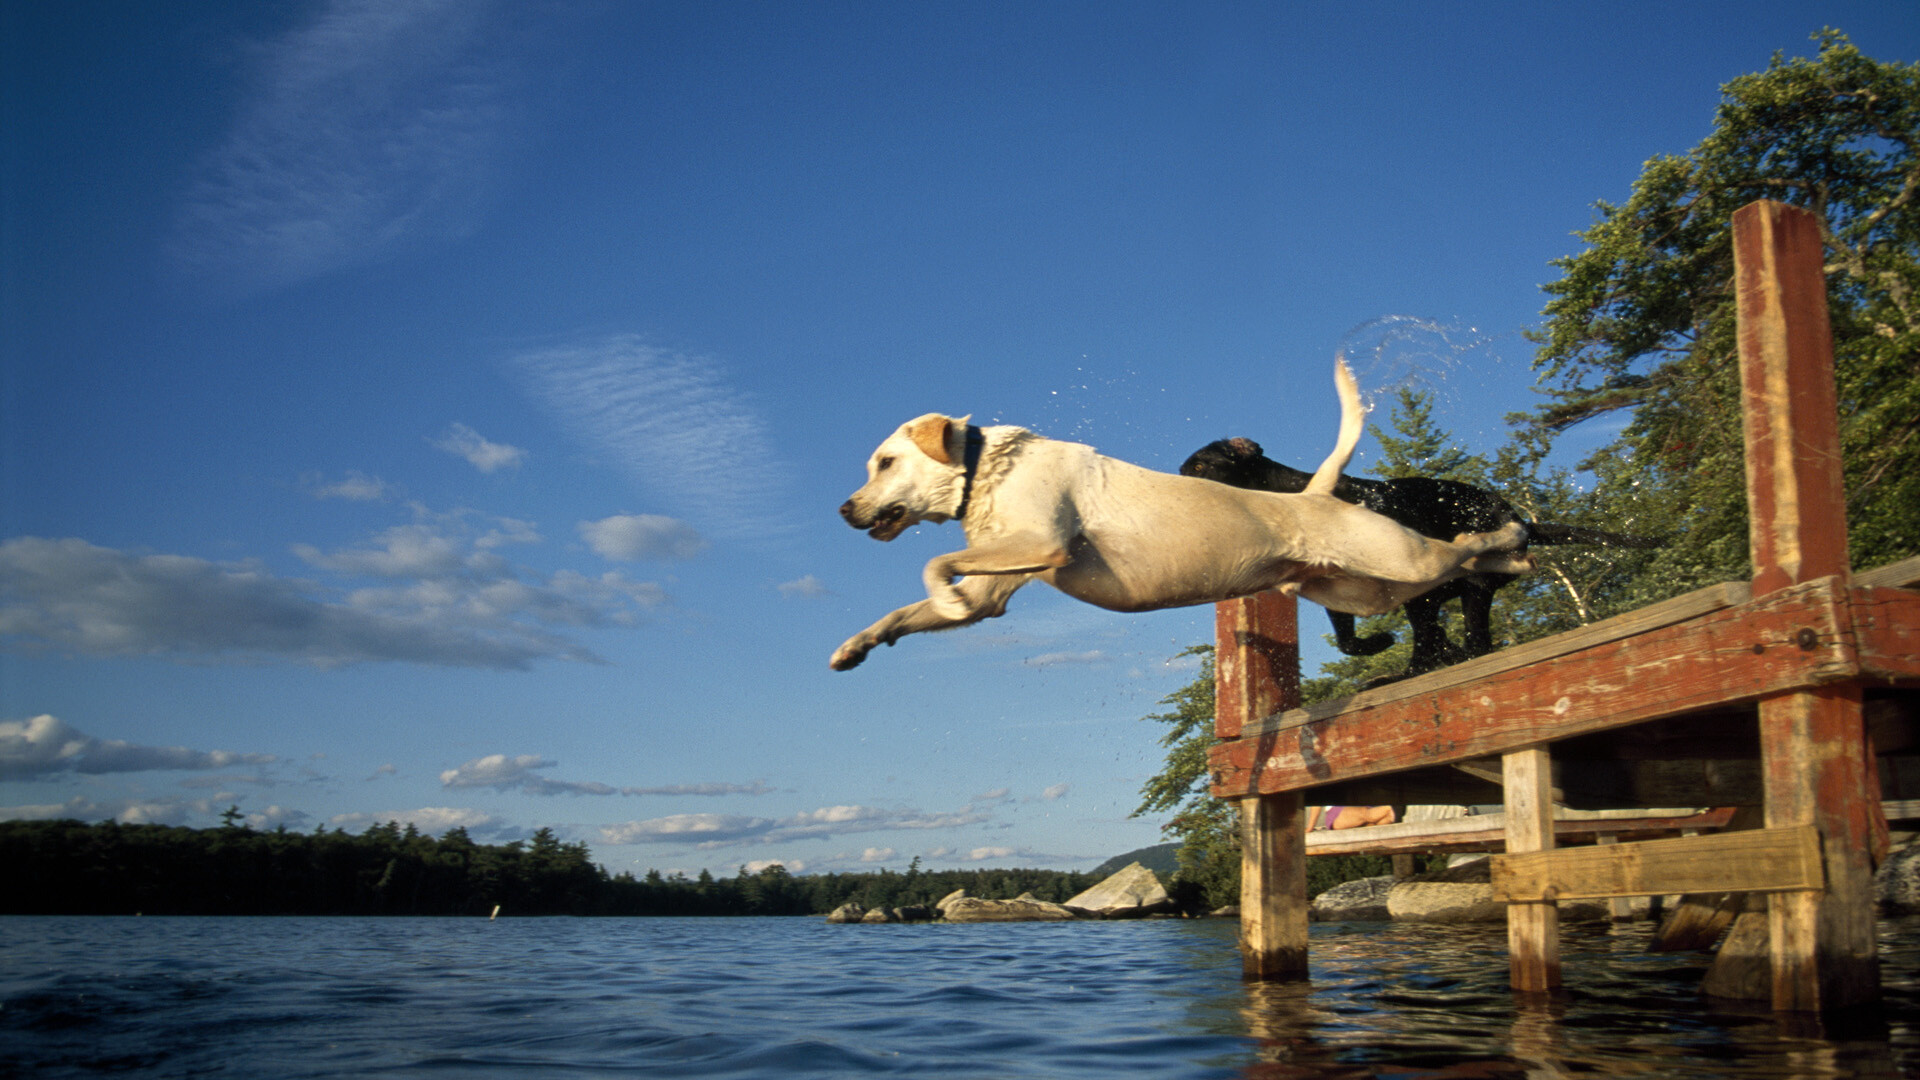 Labrador Retriever: The dog is almost waterproof and designed to remain in the water for hours. 1920x1080 Full HD Wallpaper.